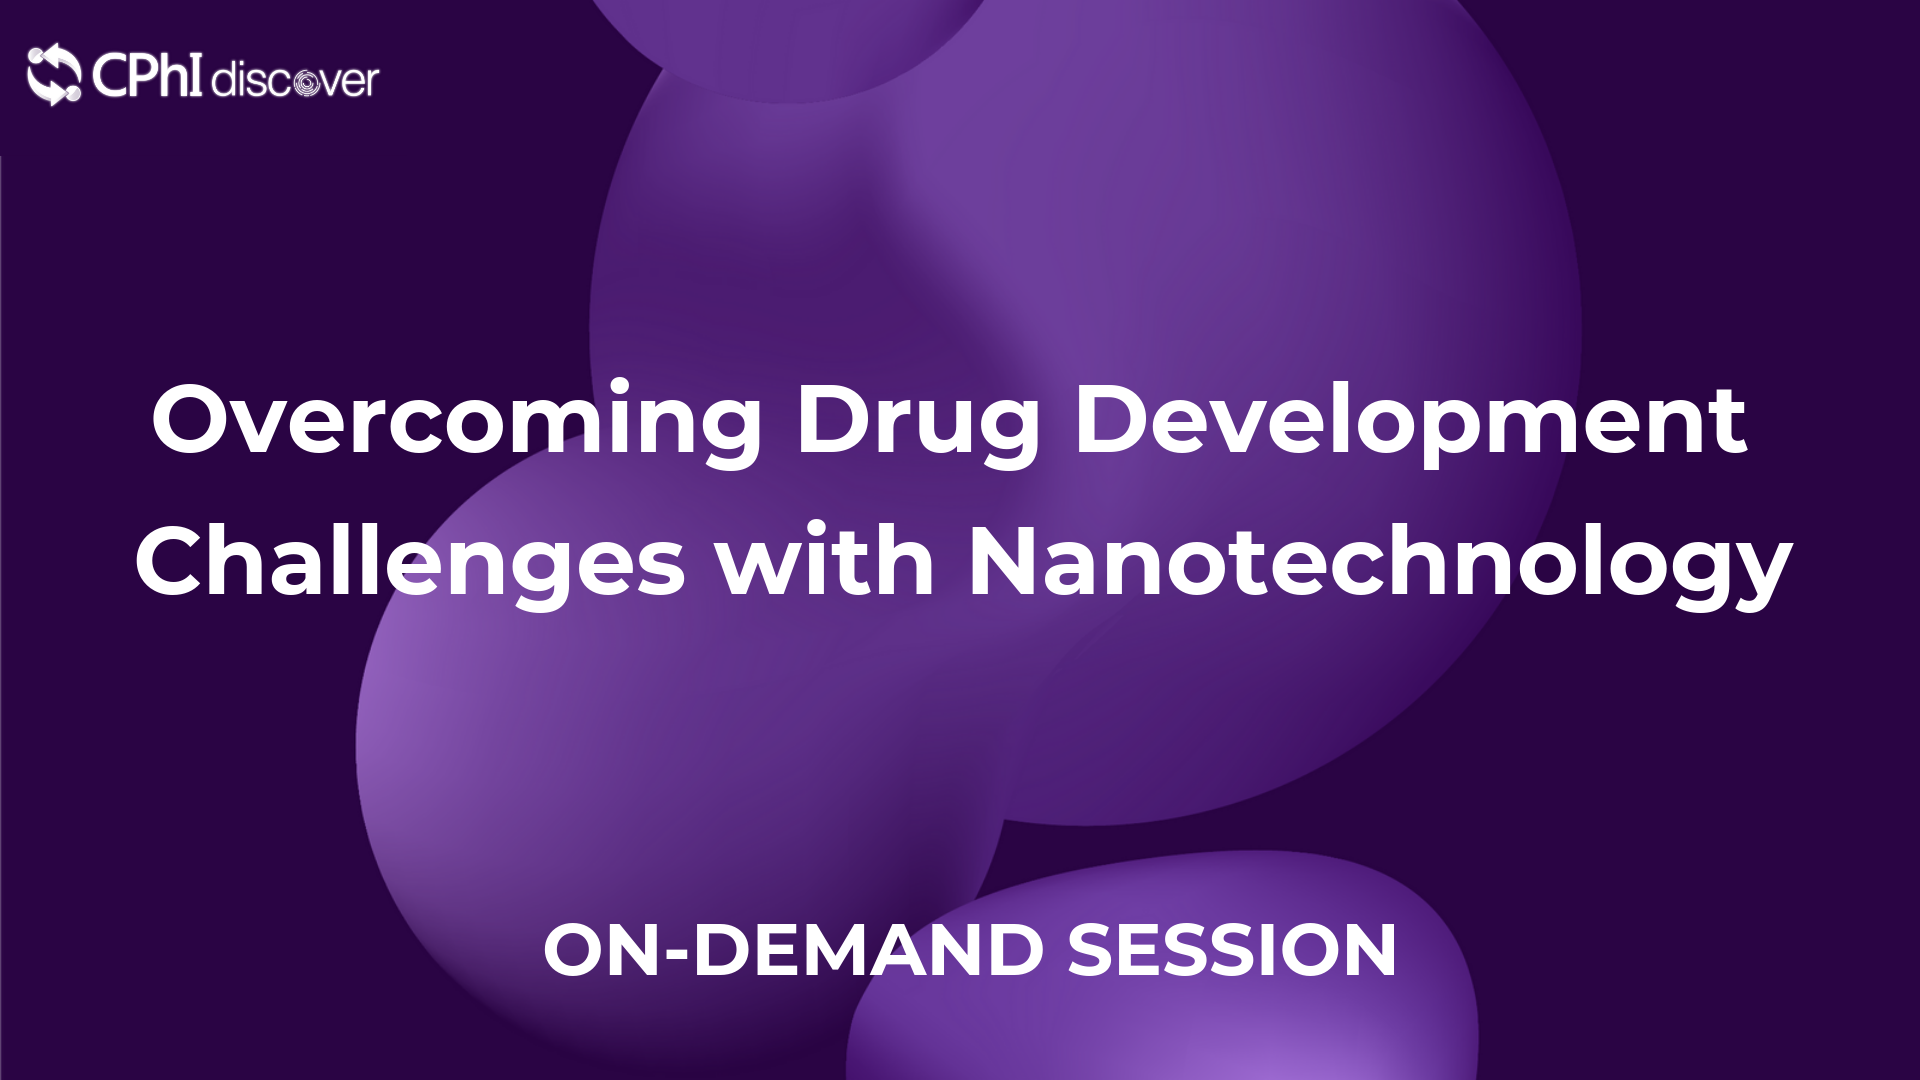 Overcoming Drug Development Challenges with Nanotechnology